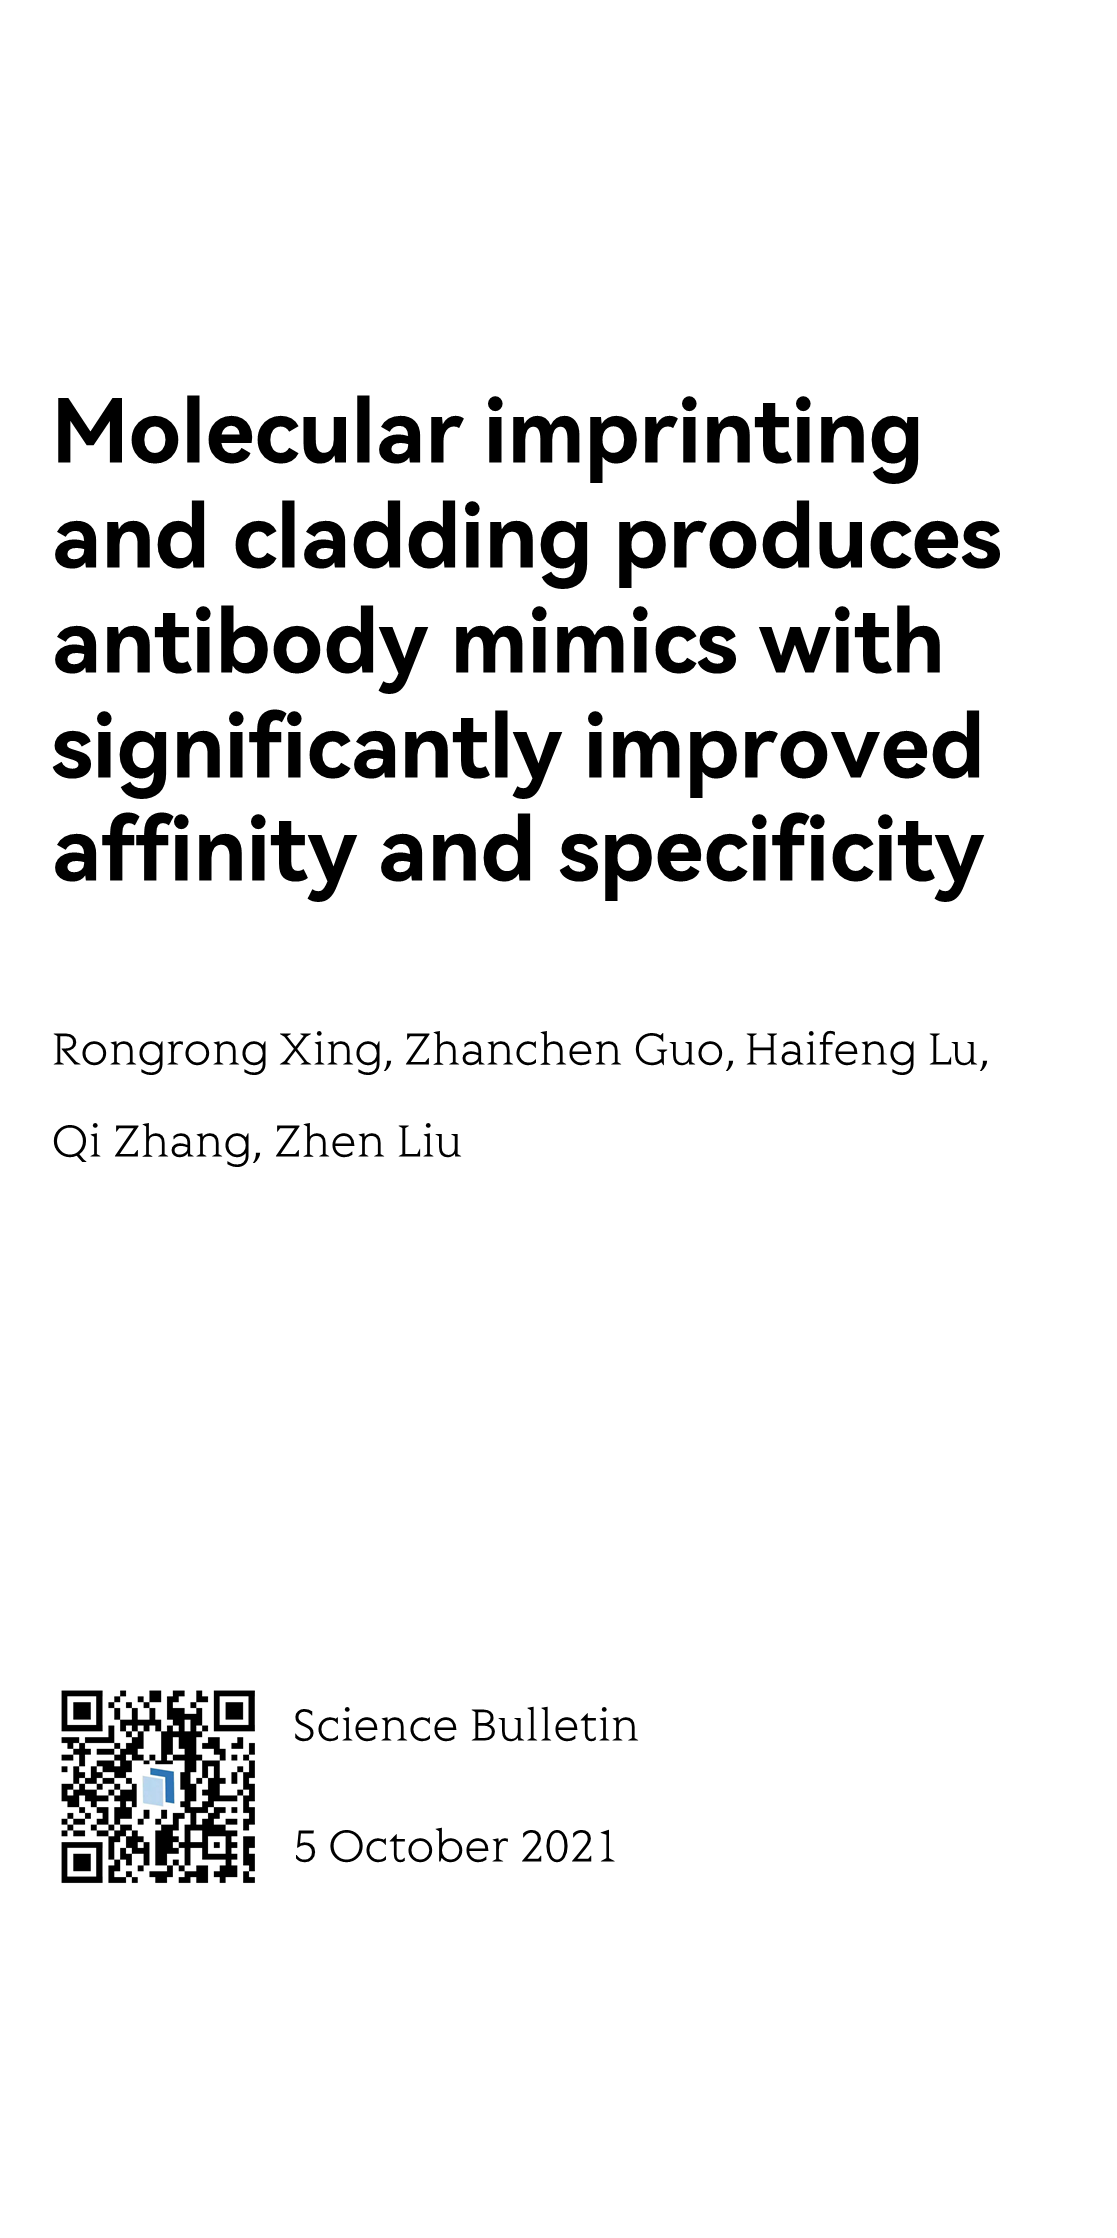 Molecular imprinting and cladding produces antibody mimics with significantly improved affinity and specificity_1